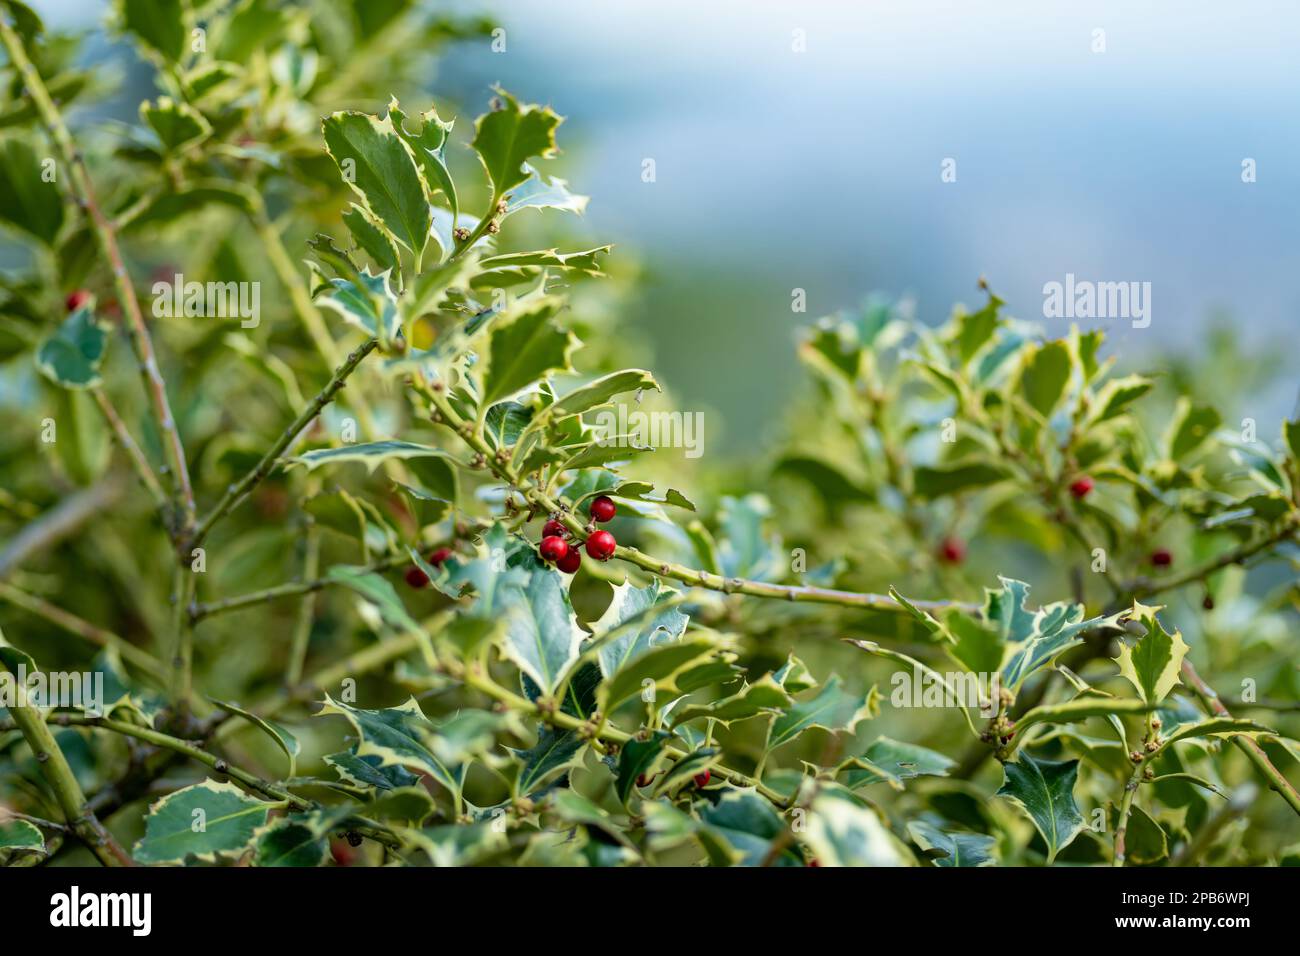 Red berries and thorny green leaves of a holly plant Stock Photo